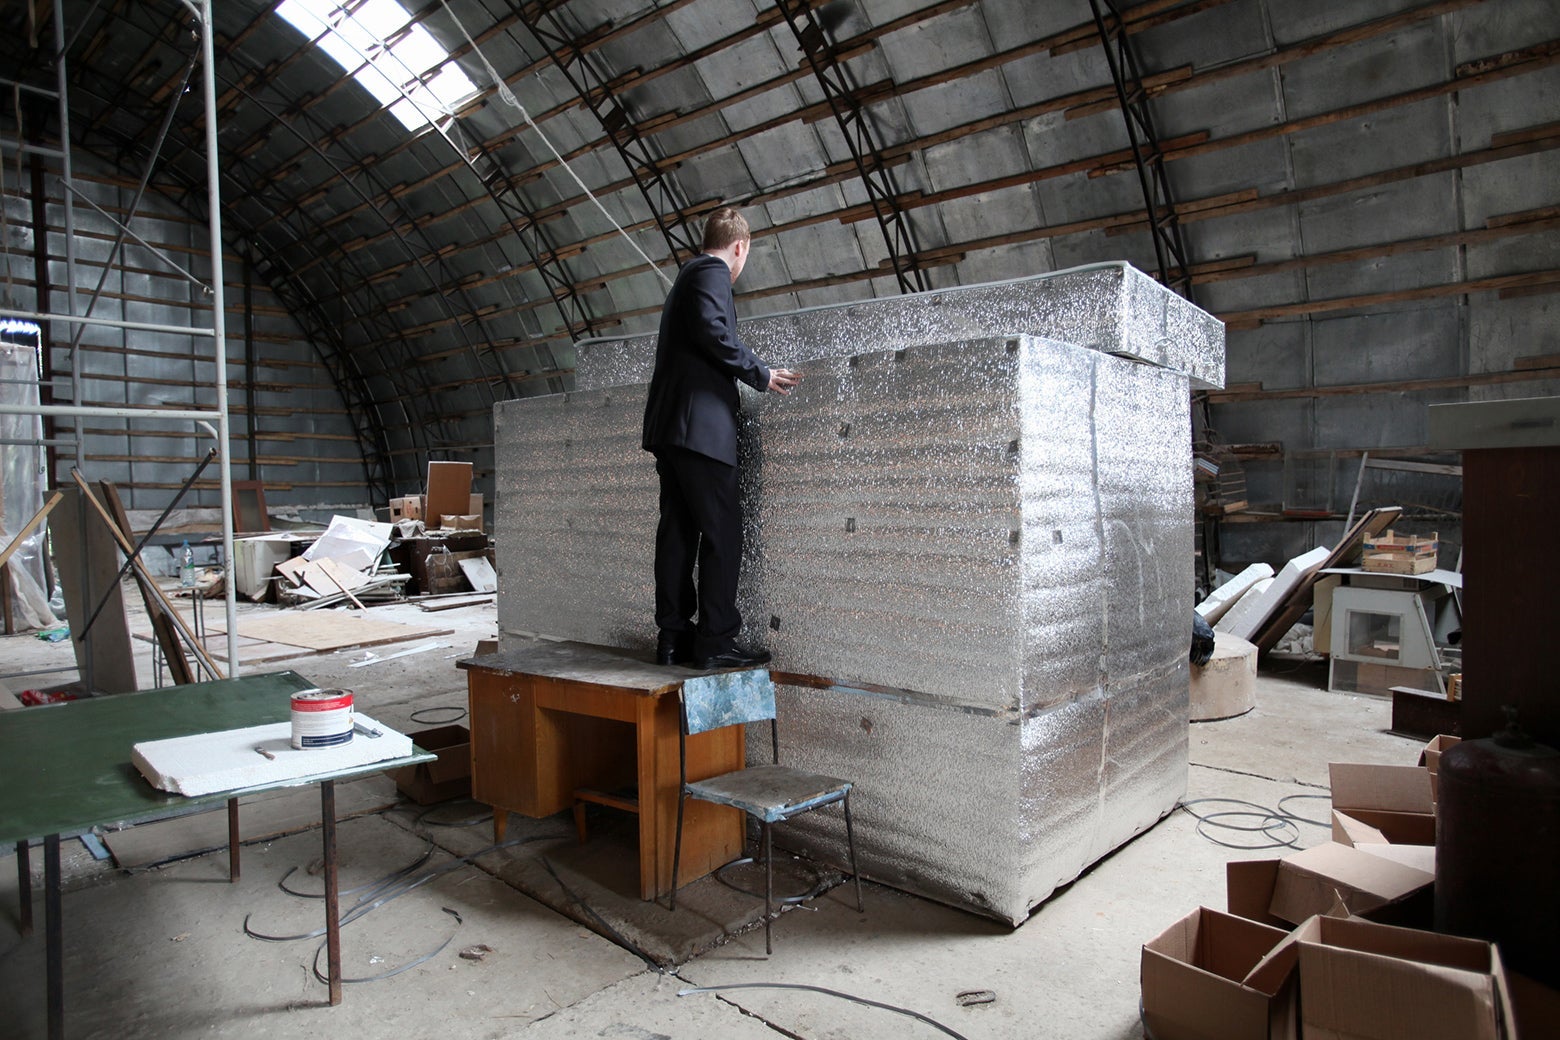 In the center of a cluttered warehouse room, a man stands on a desk to look inside a large silver container.